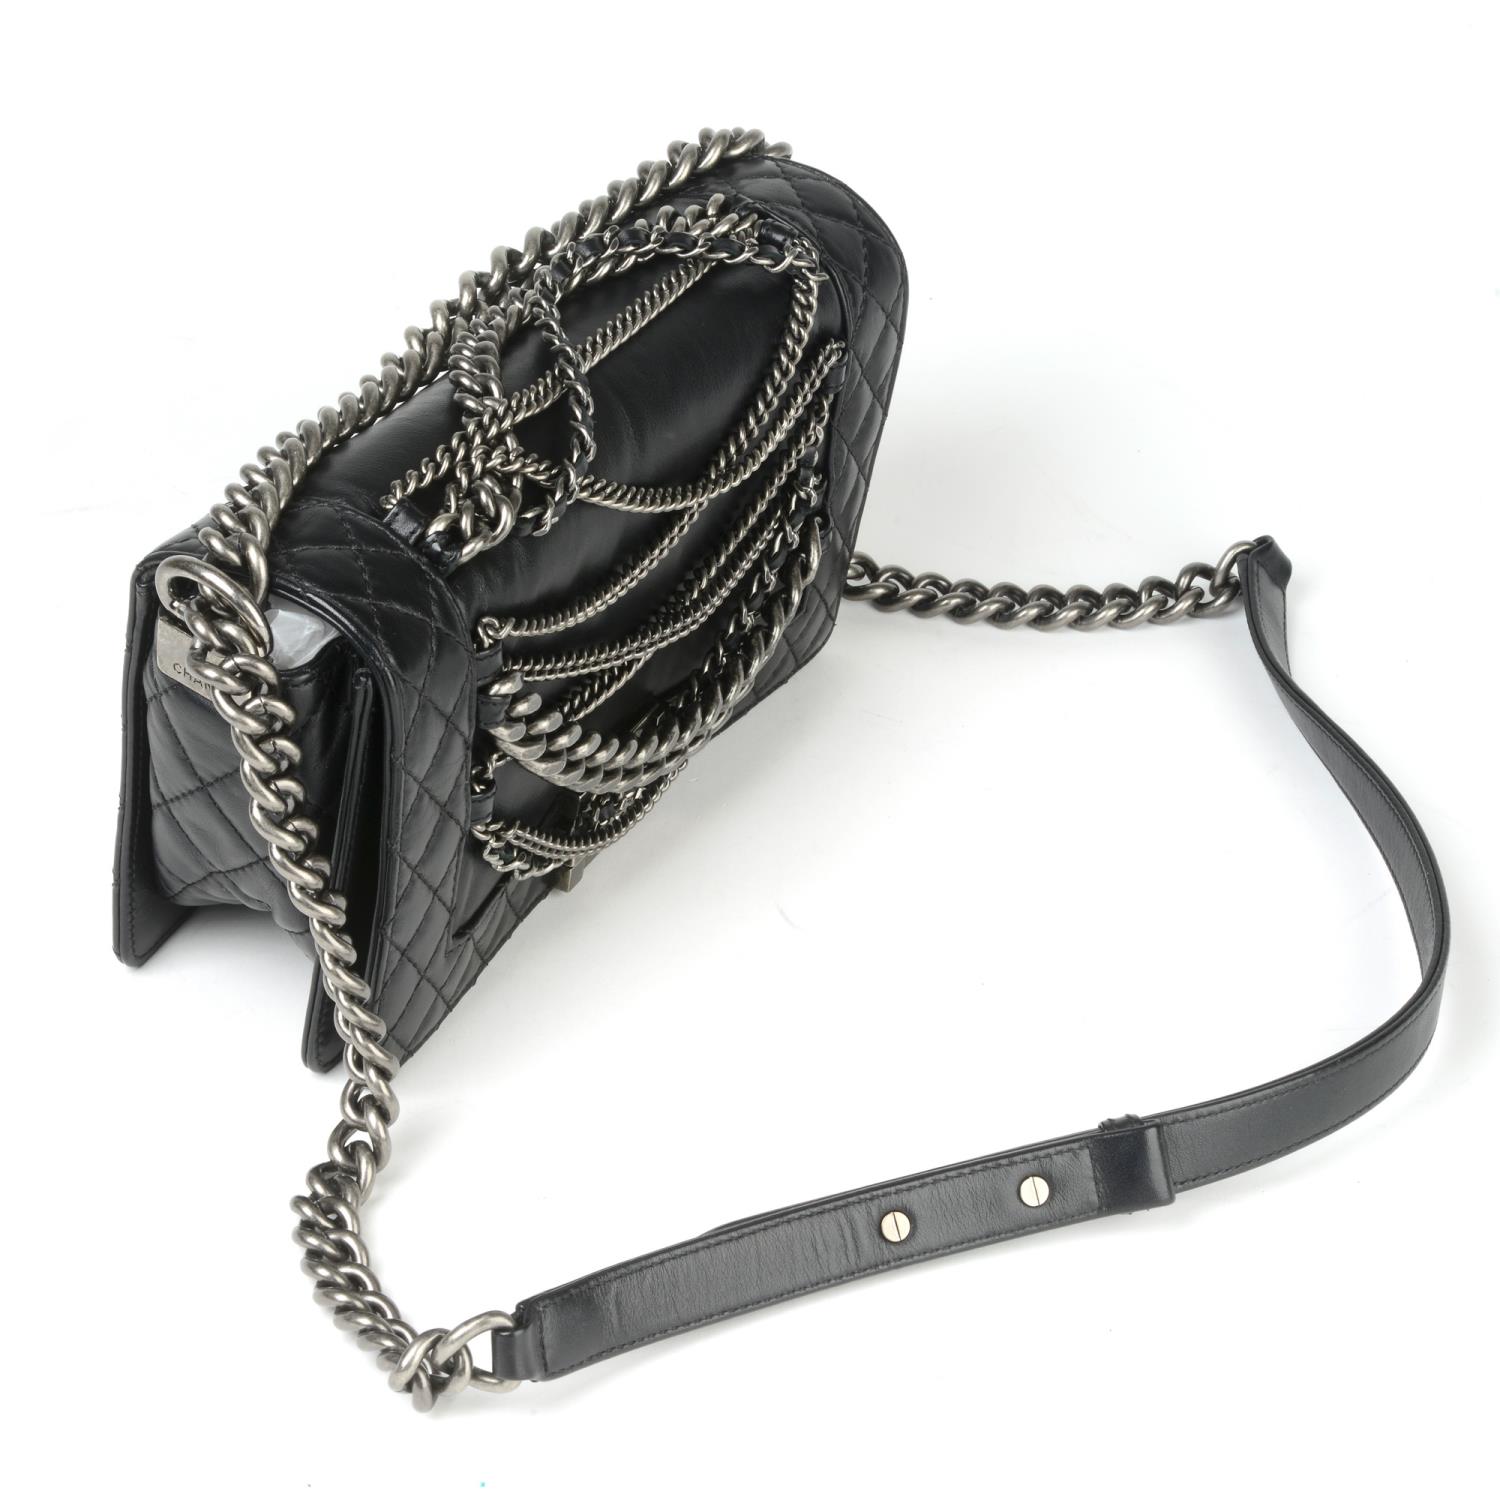 CHANEL - a Small Enchained Boy Flap handbag. - Image 2 of 4